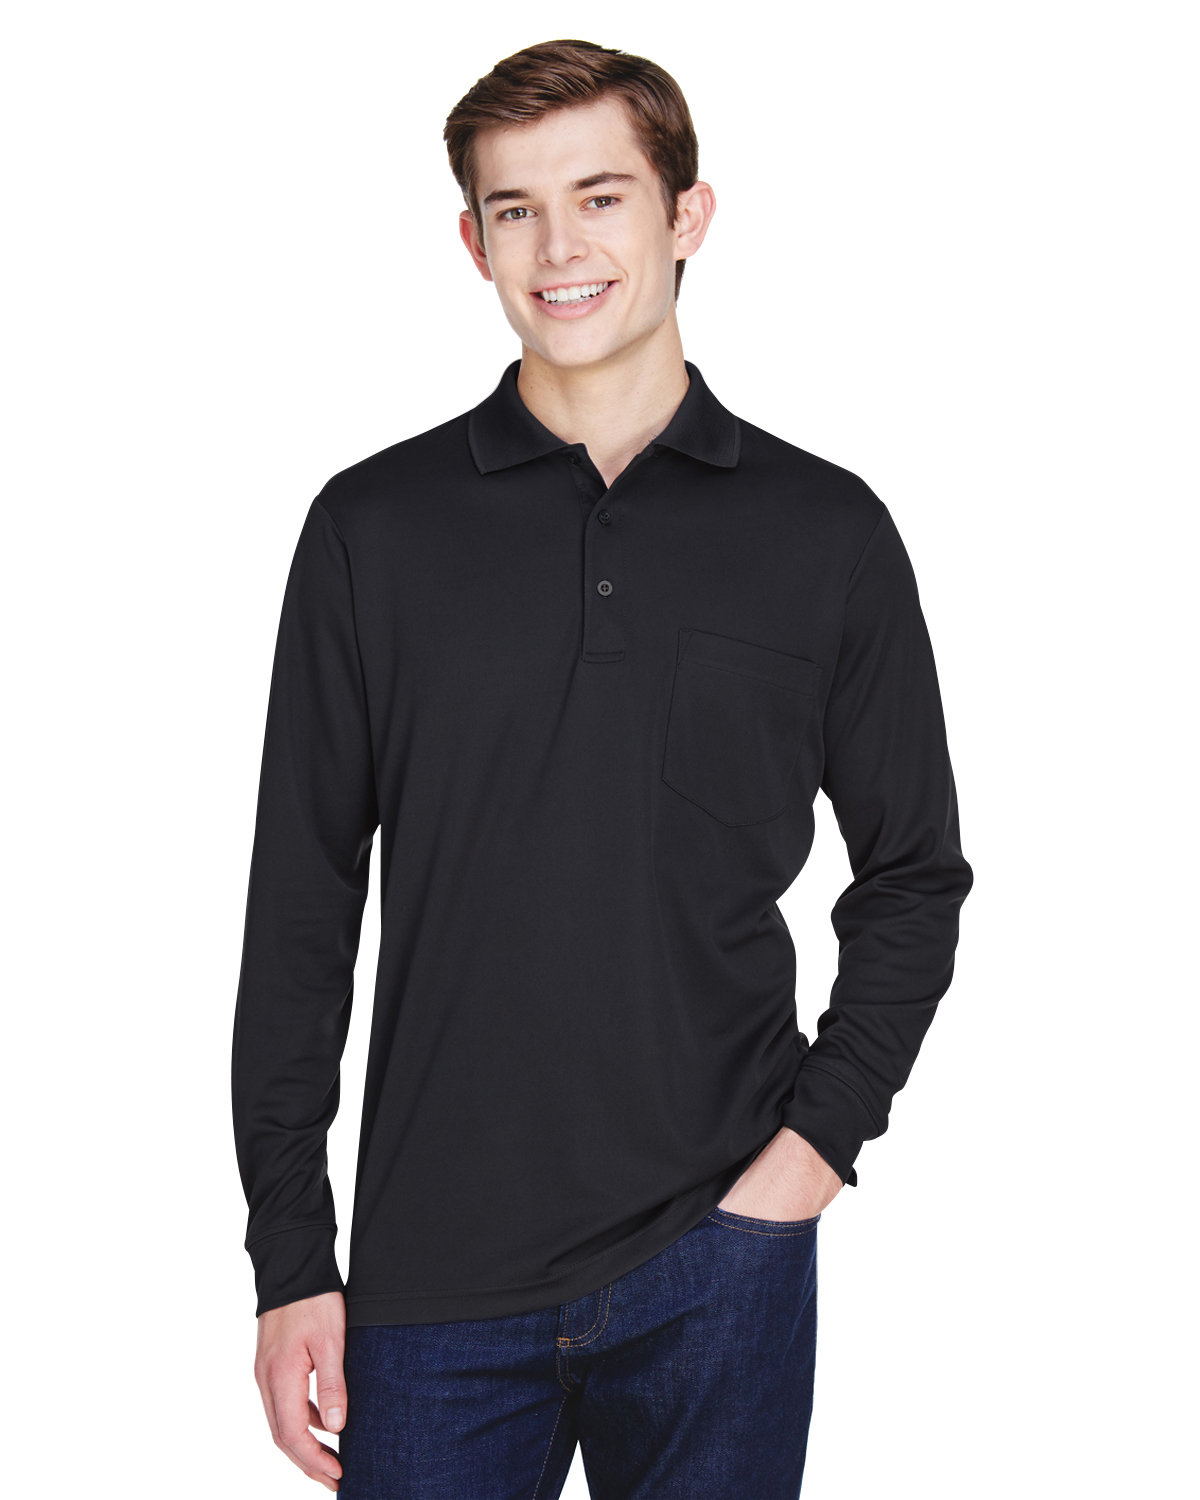 Core365 Adult Pinnacle Performance Long-Sleeve Piqué Polo with Pocket BLACK 